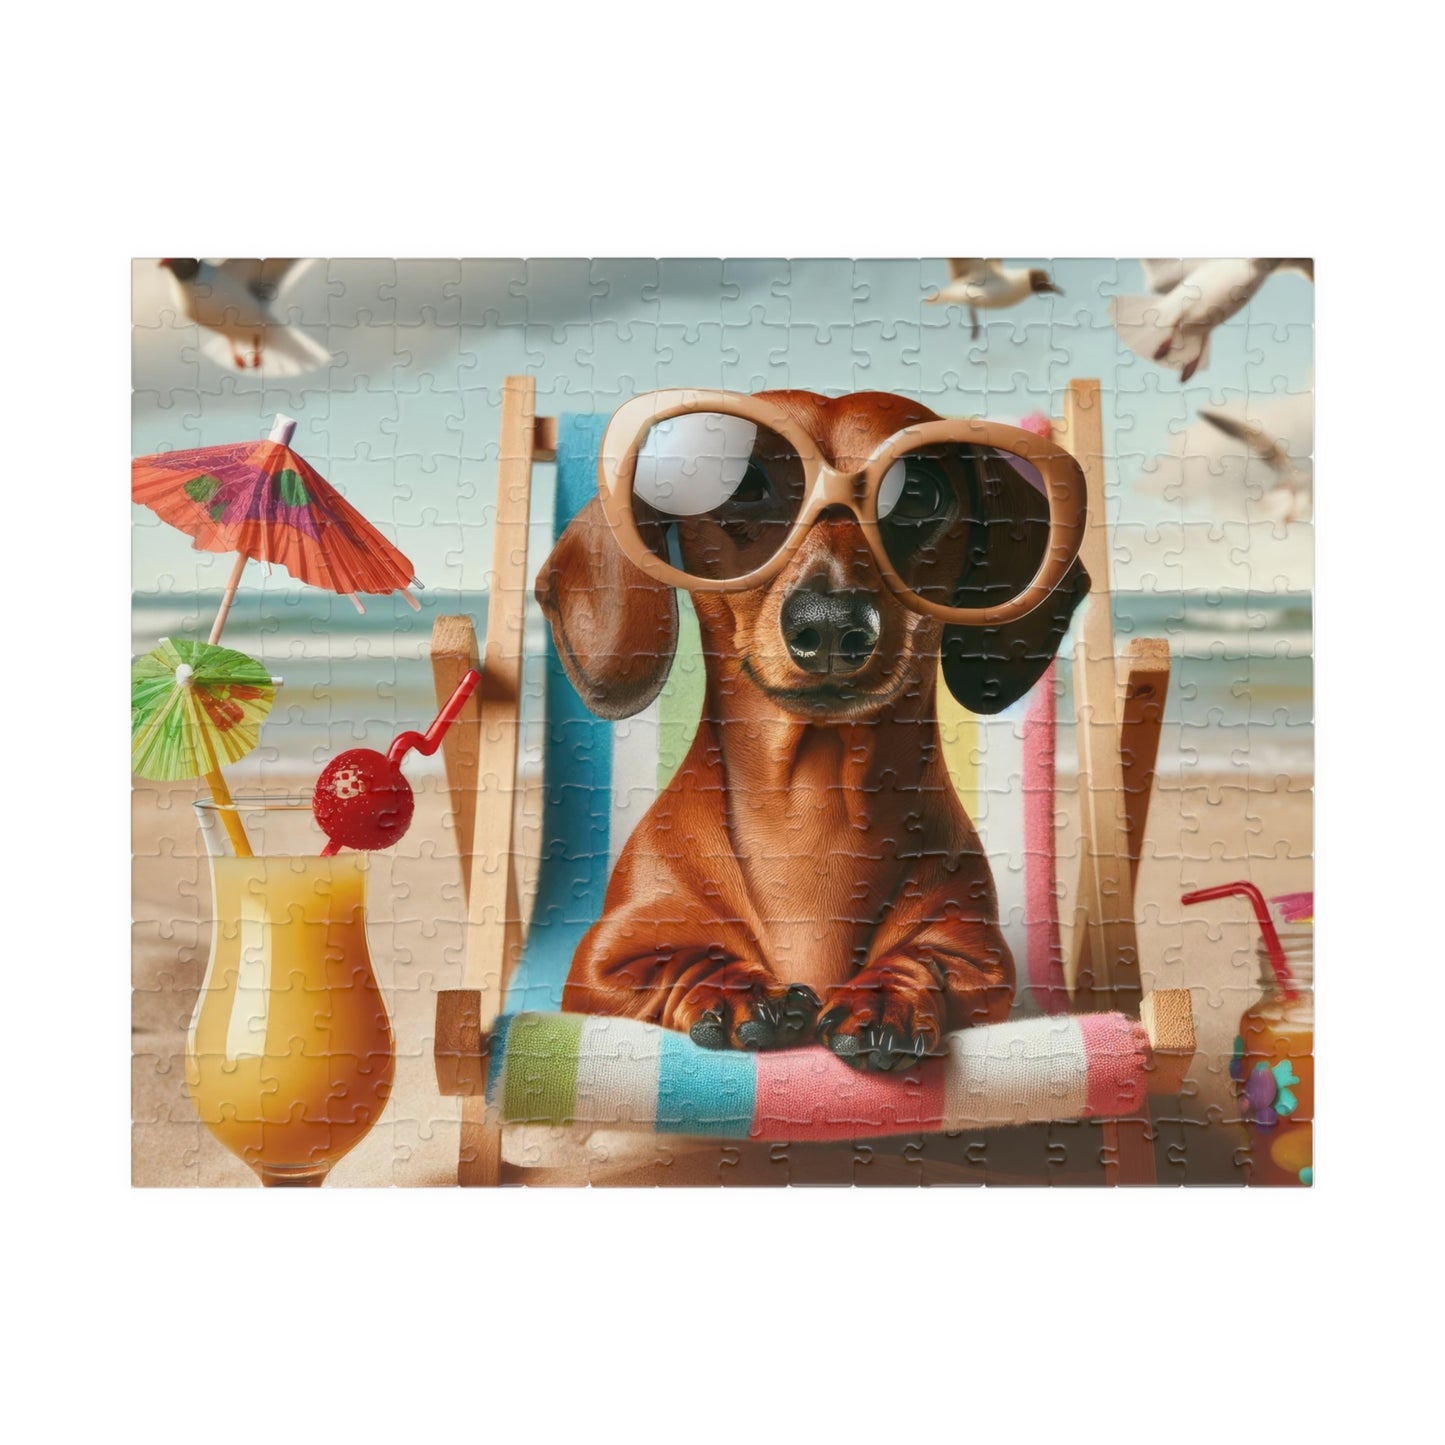 Sunny Dachshund Beach Puzzle - Coco on Vacation Jigsaw, Available in 110, 252, 520 Pieces, Glossy Finish